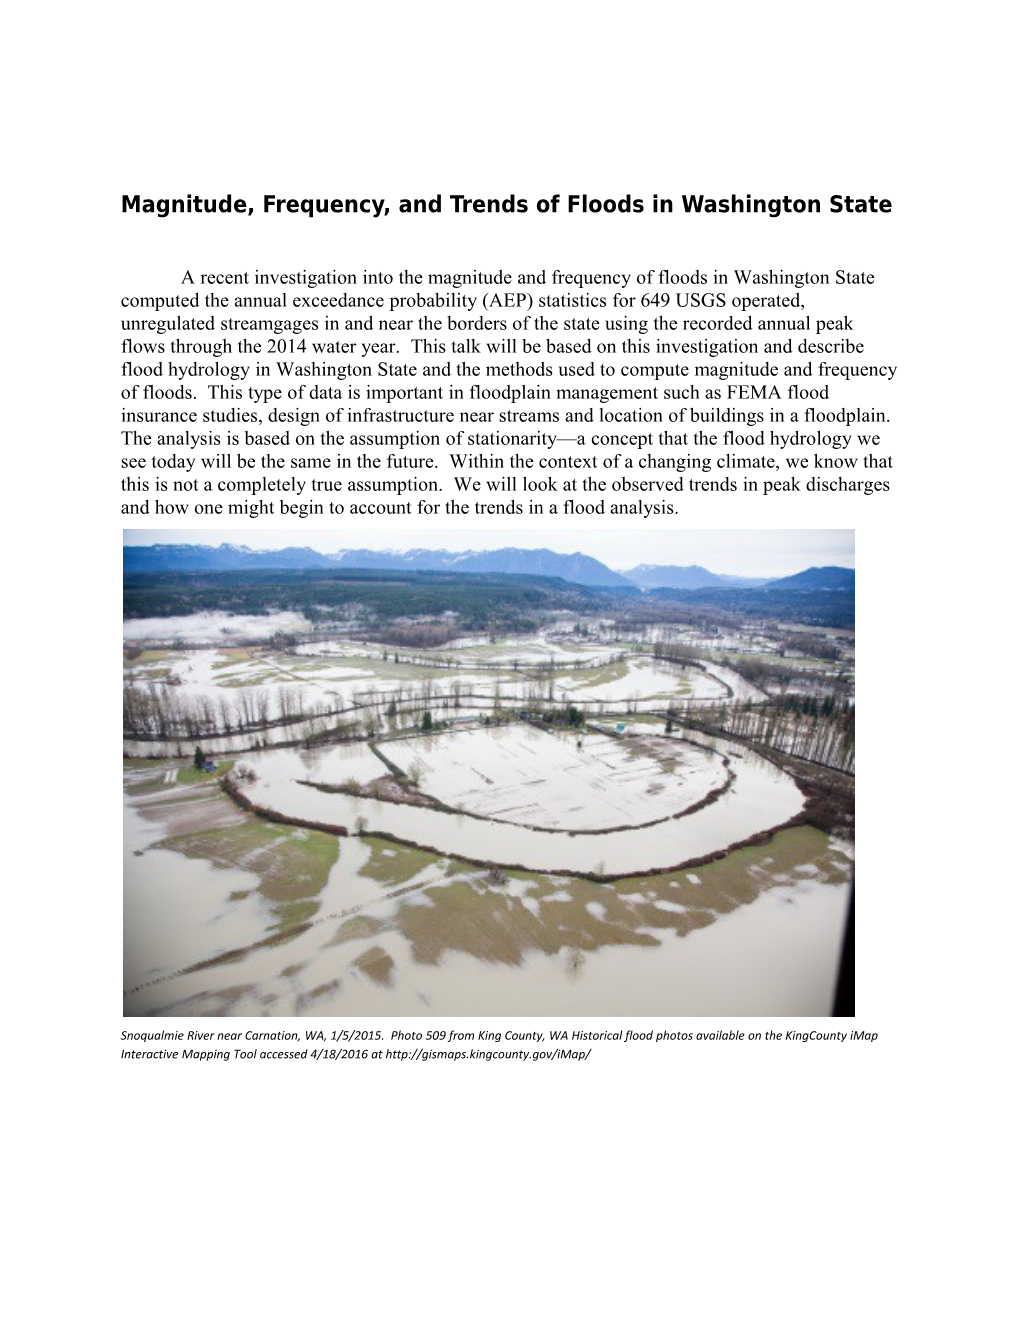 Magnitude, Frequency, and Trends of Floods in Washington State